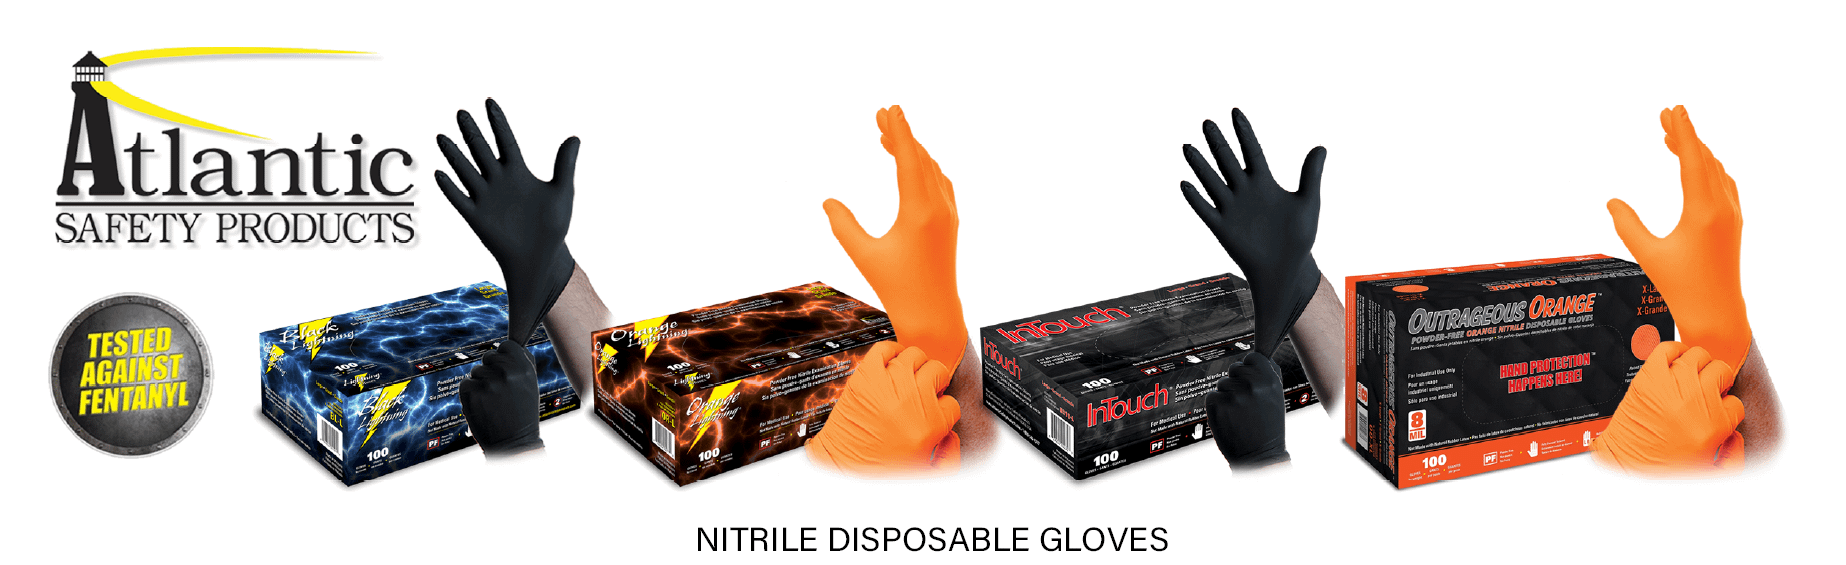 NACH Marketing - Atlantic Safety Products - Nitrile Disposable Gloves